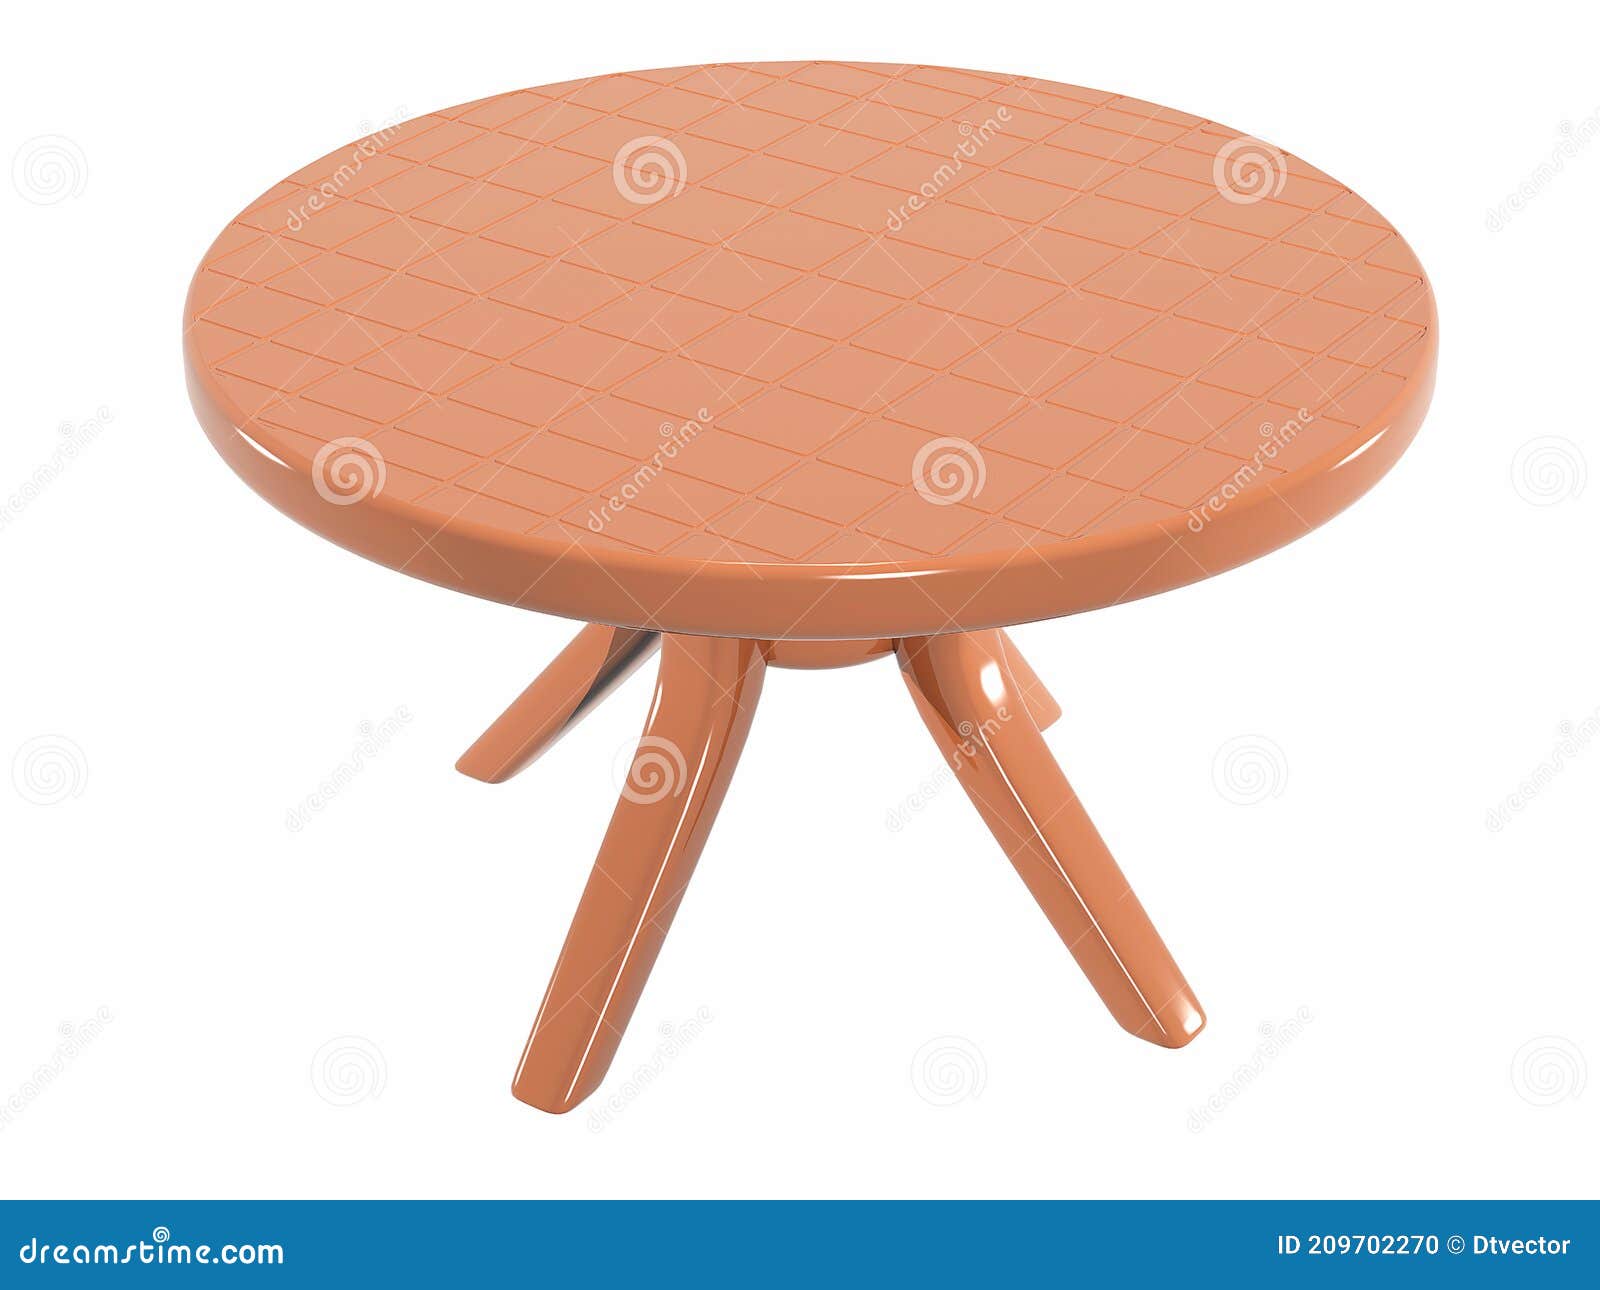 plastic round table top view